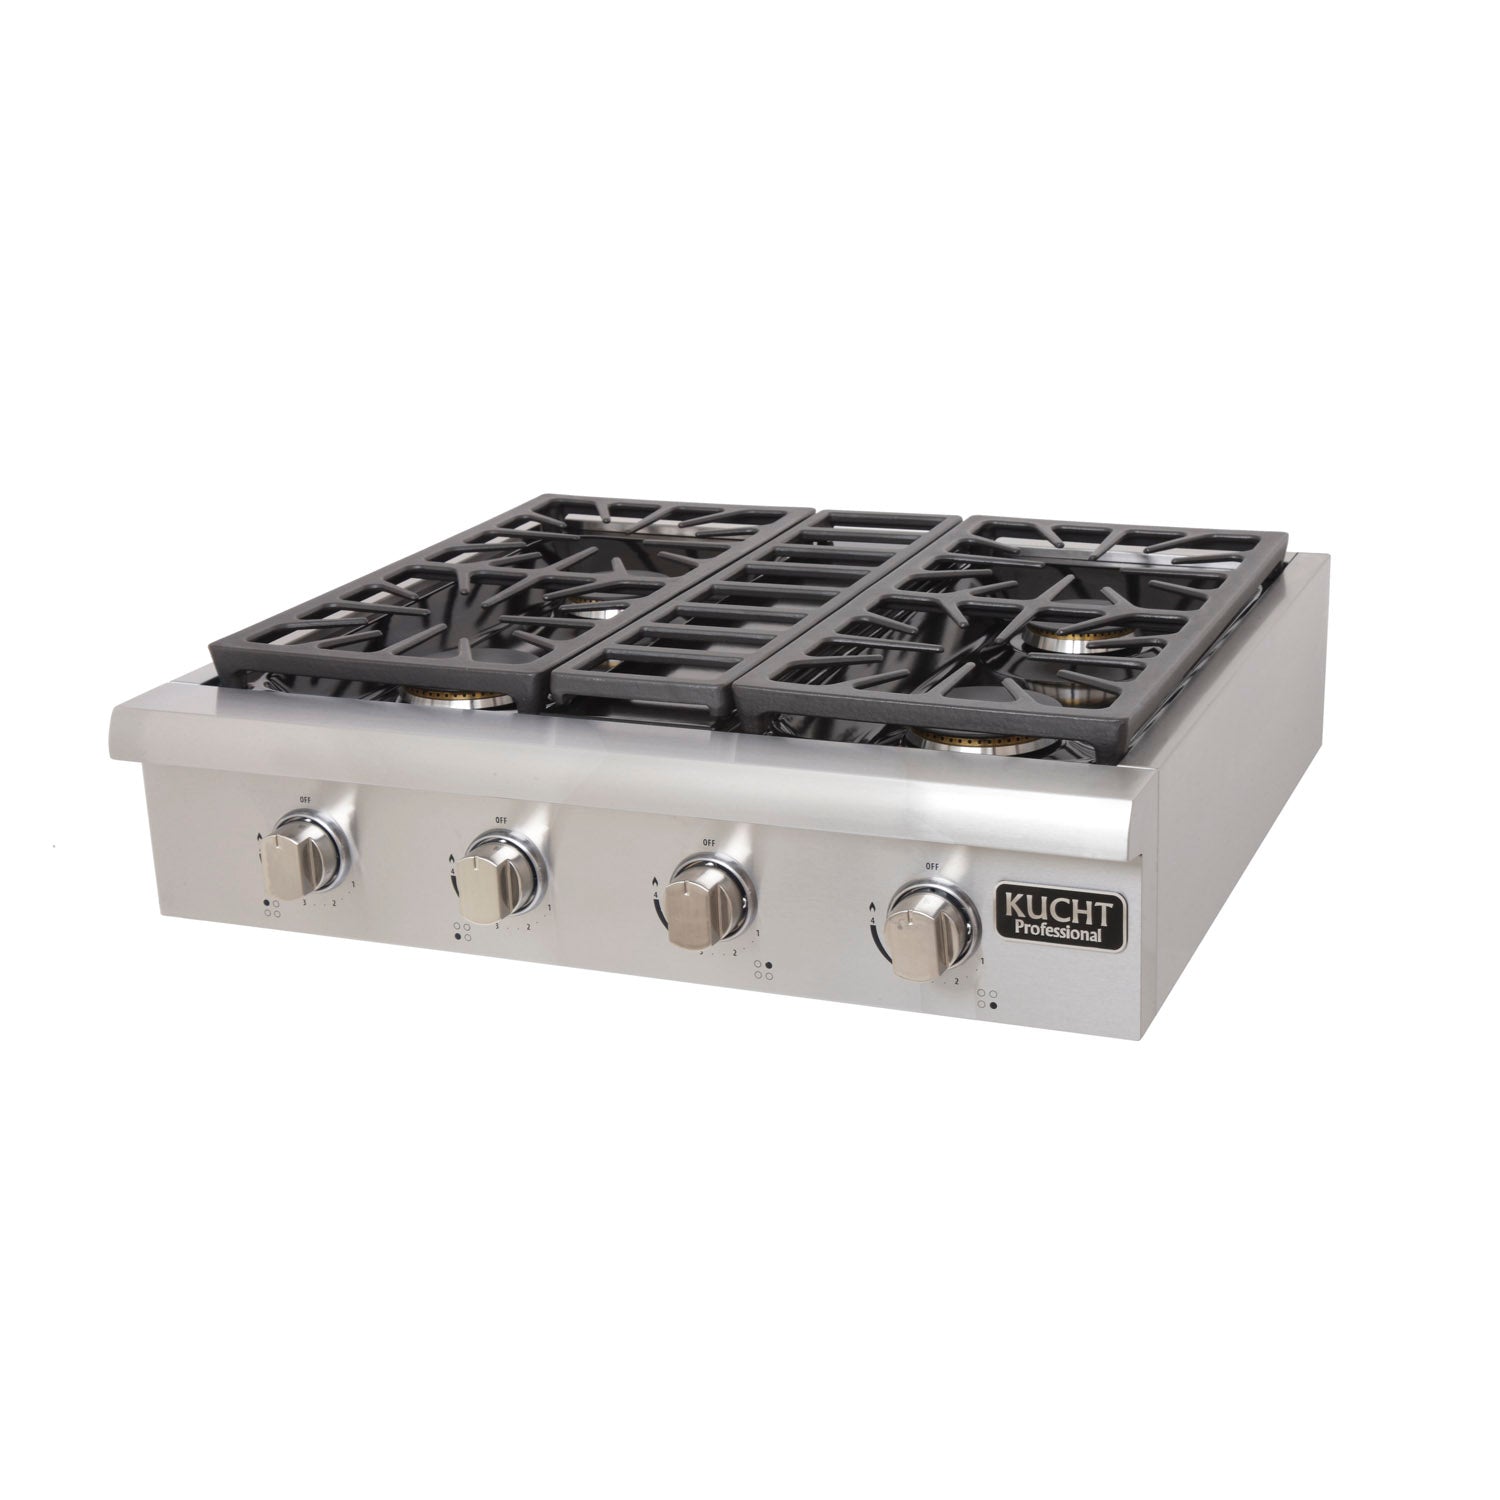 Kucht KRT Series 30" Natural Gas Range-Top With 4 Burners and Classic Silver Knobs